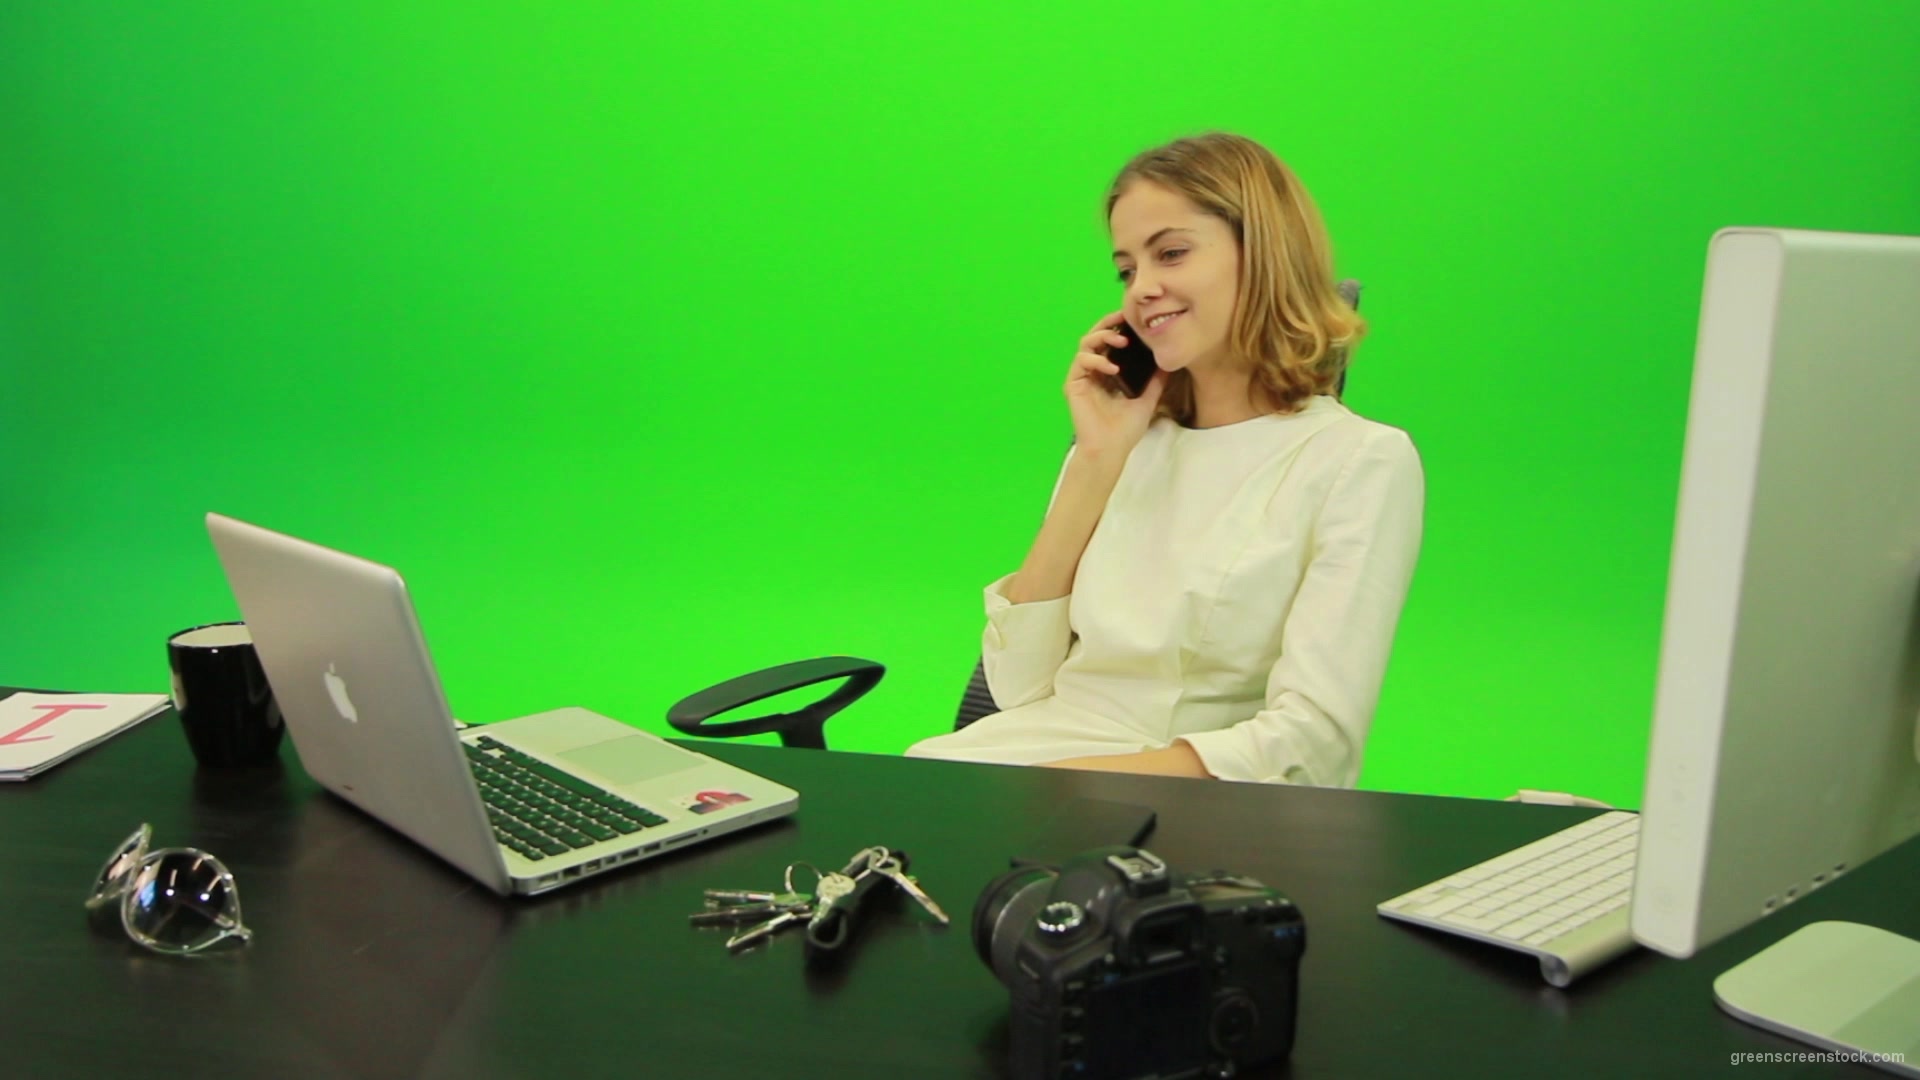 Laughing-Business-Woman-is-Talking-on-the-Phone-Green-Screen-Footage_005 Green Screen Stock